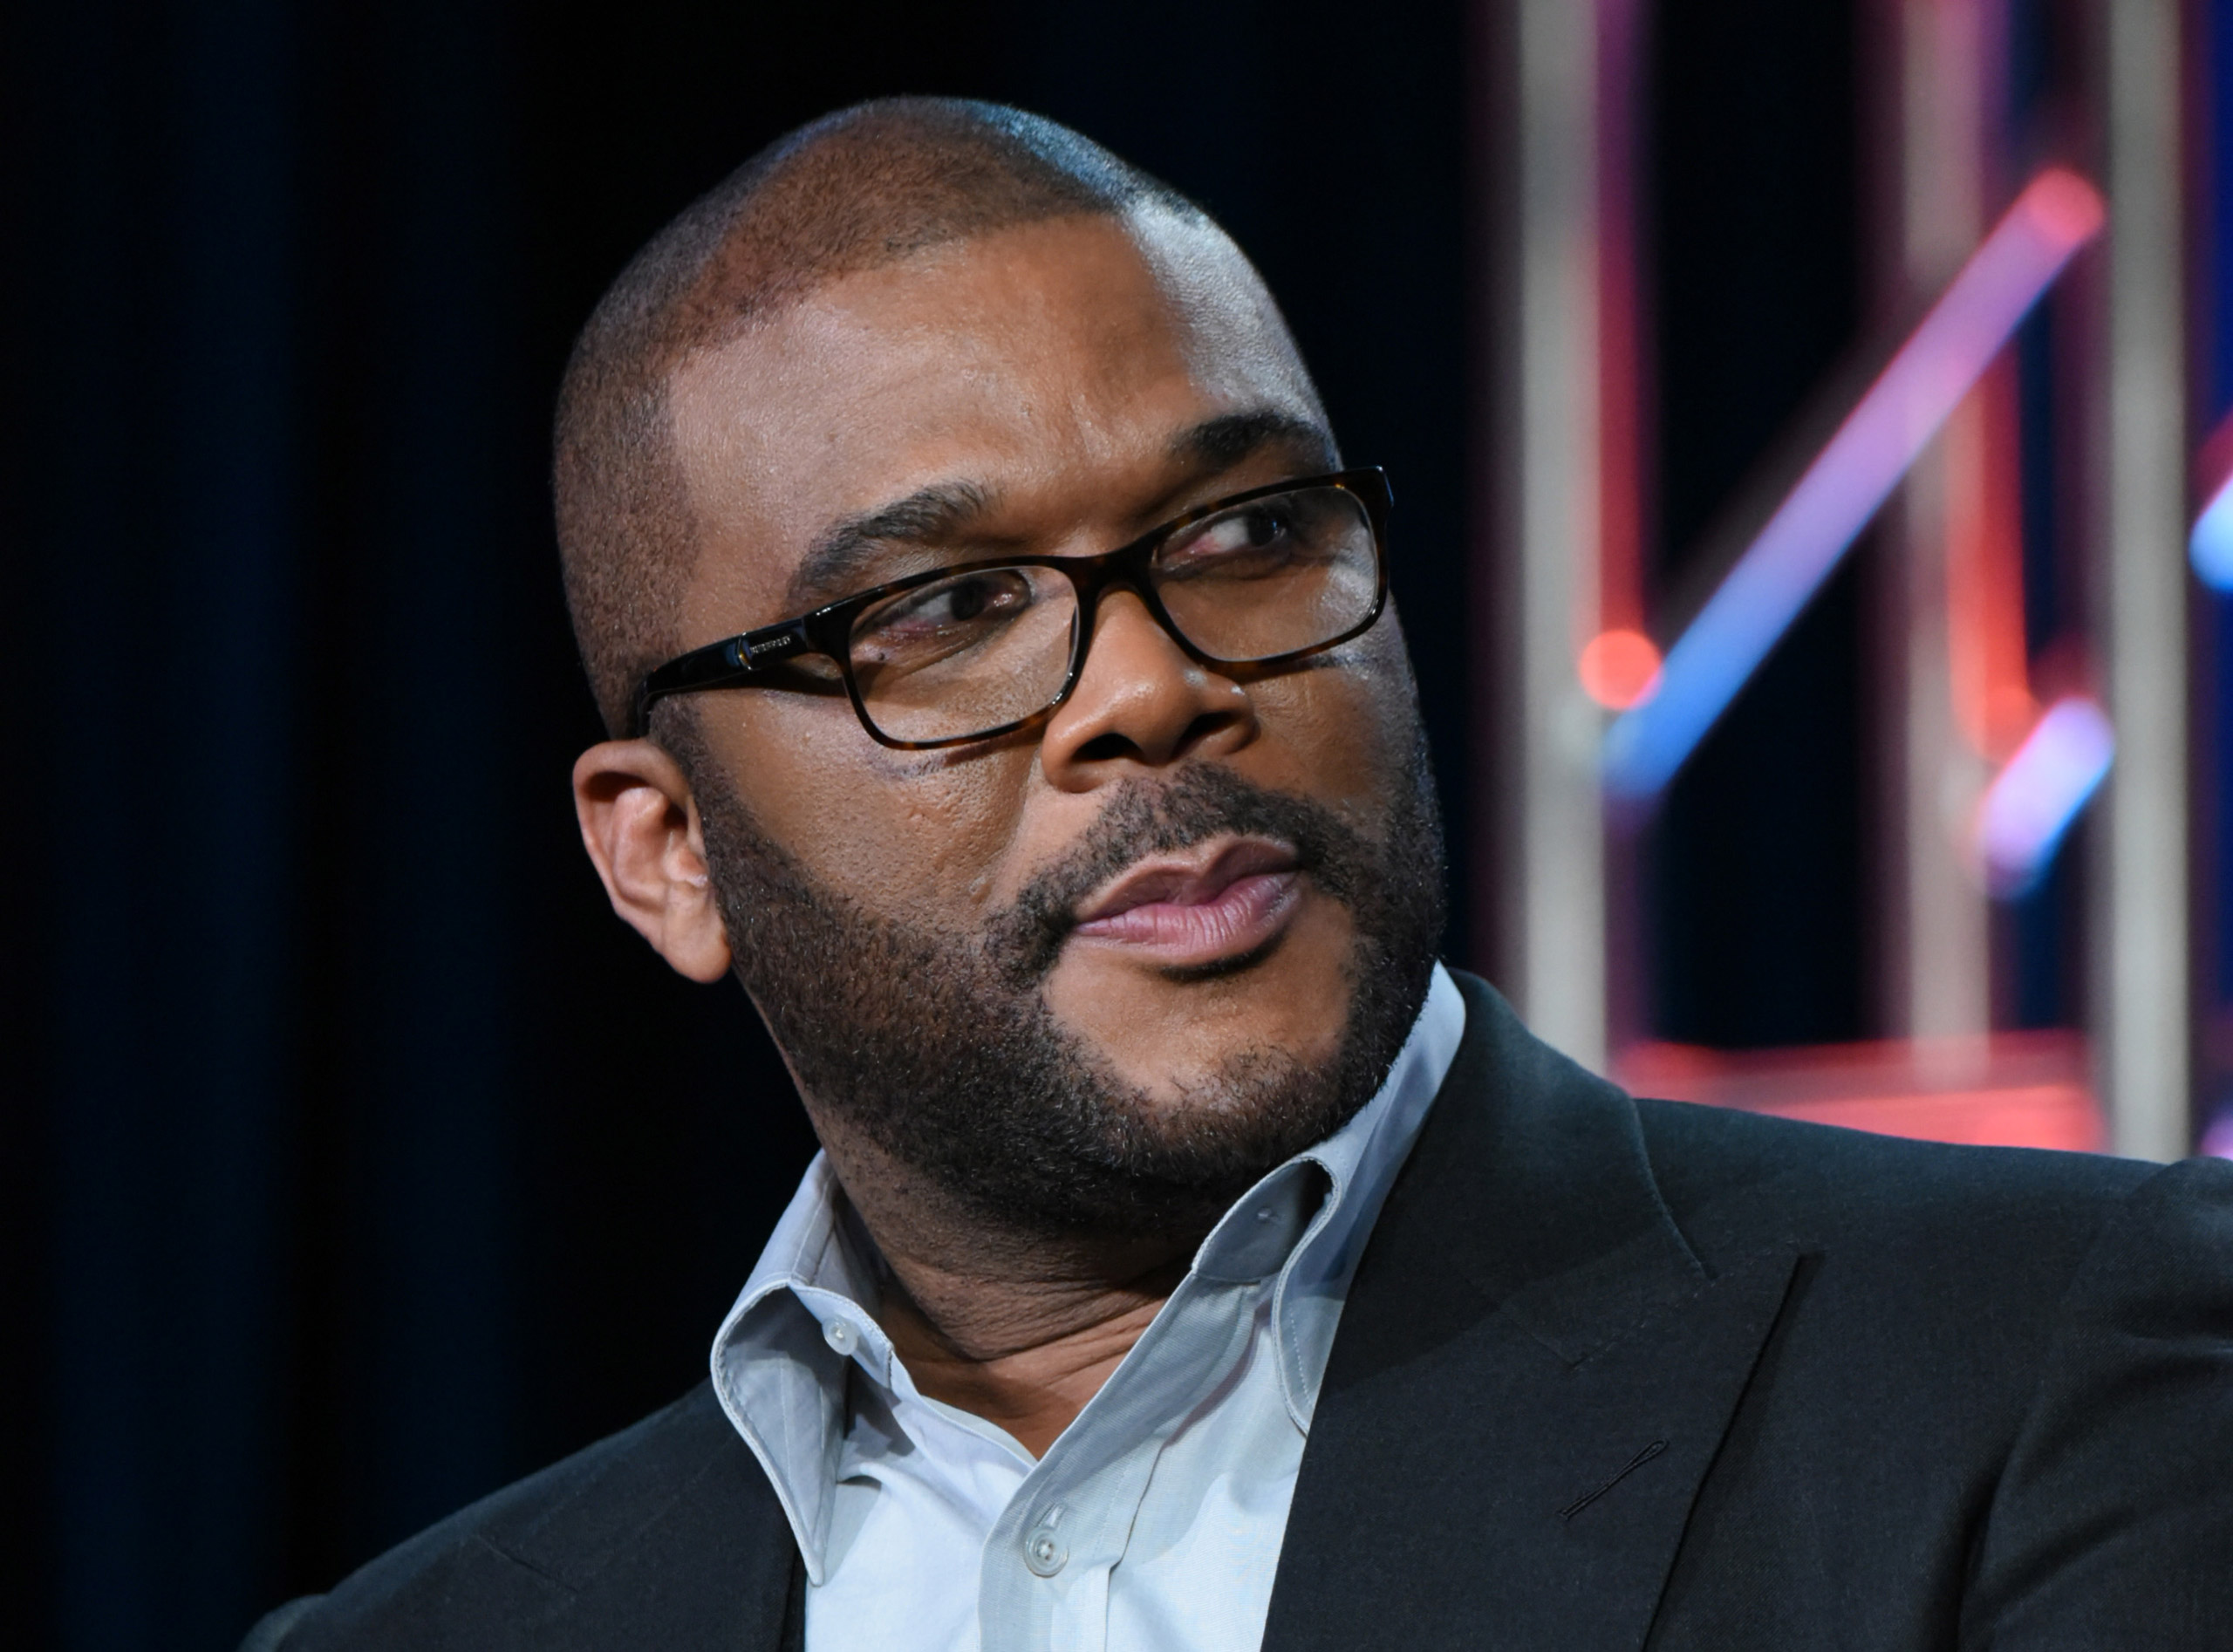 Tyler Perry participates in a panel for "The Passion" at the Fox Winter TCA in Pasadena, Calif., on Jan. 15, 2016. (Richard Shotwell—Invision/AP)